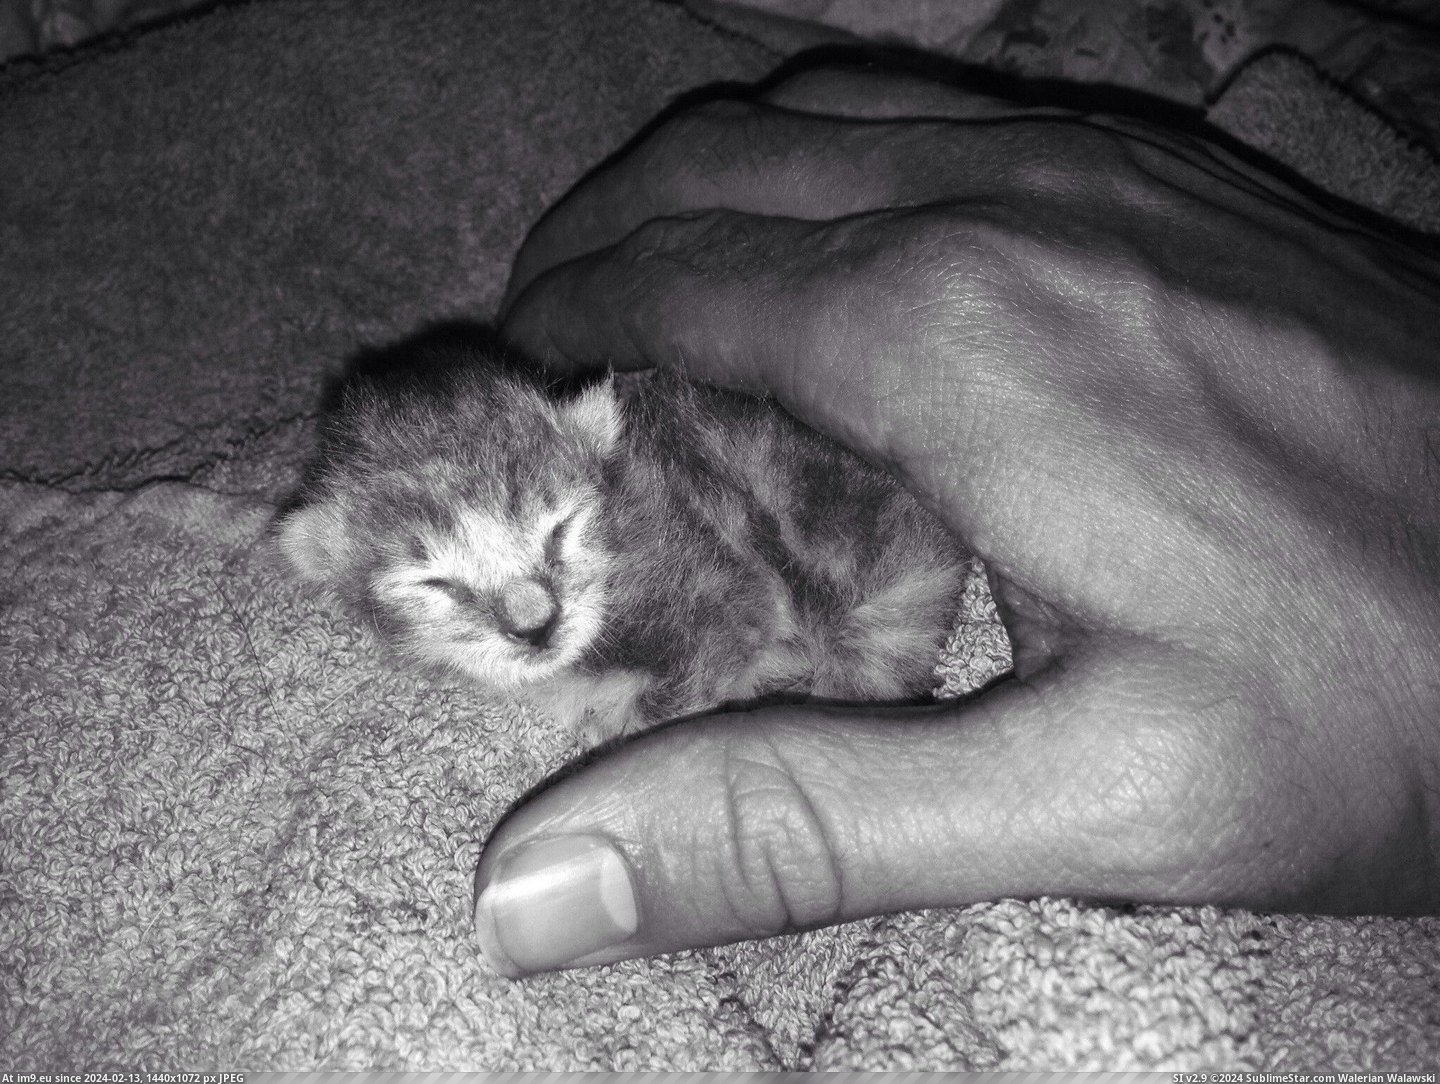 #Cat #Old #Thumb #Size #Unexpected #Kitten #Single [Aww] Our 13 your old cat had a single unexpected kitten today. He's about the size of my thumb Pic. (Изображение из альбом My r/AWW favs))